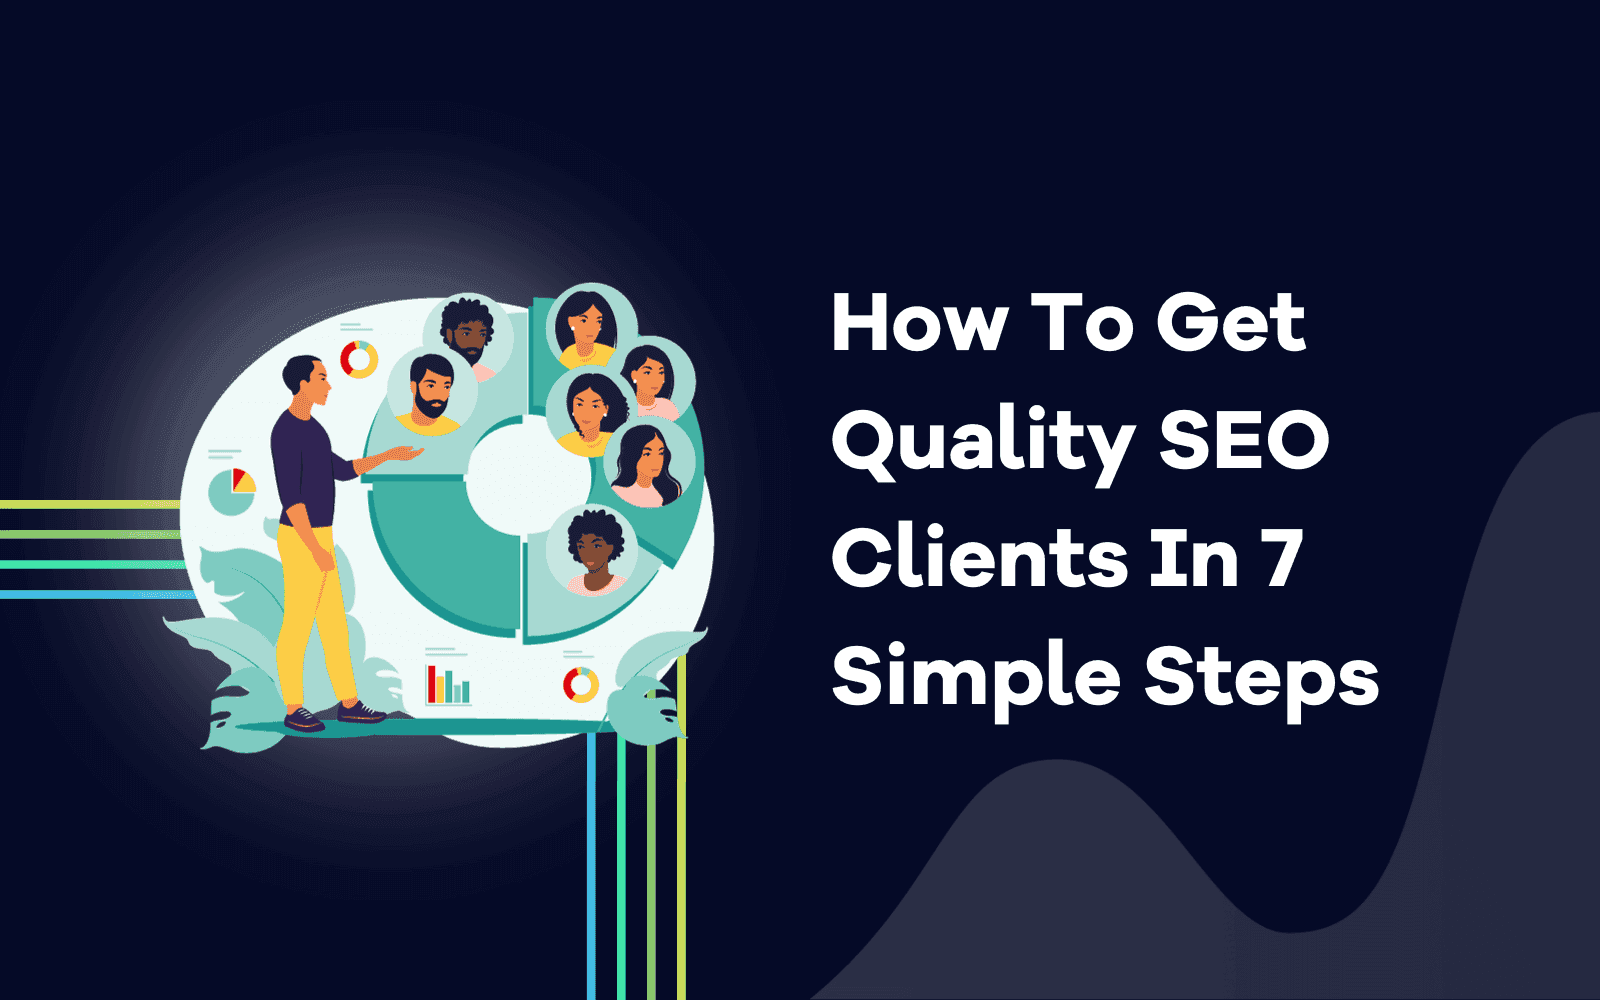 How To Get Quality SEO Clients In 7 Simple Steps